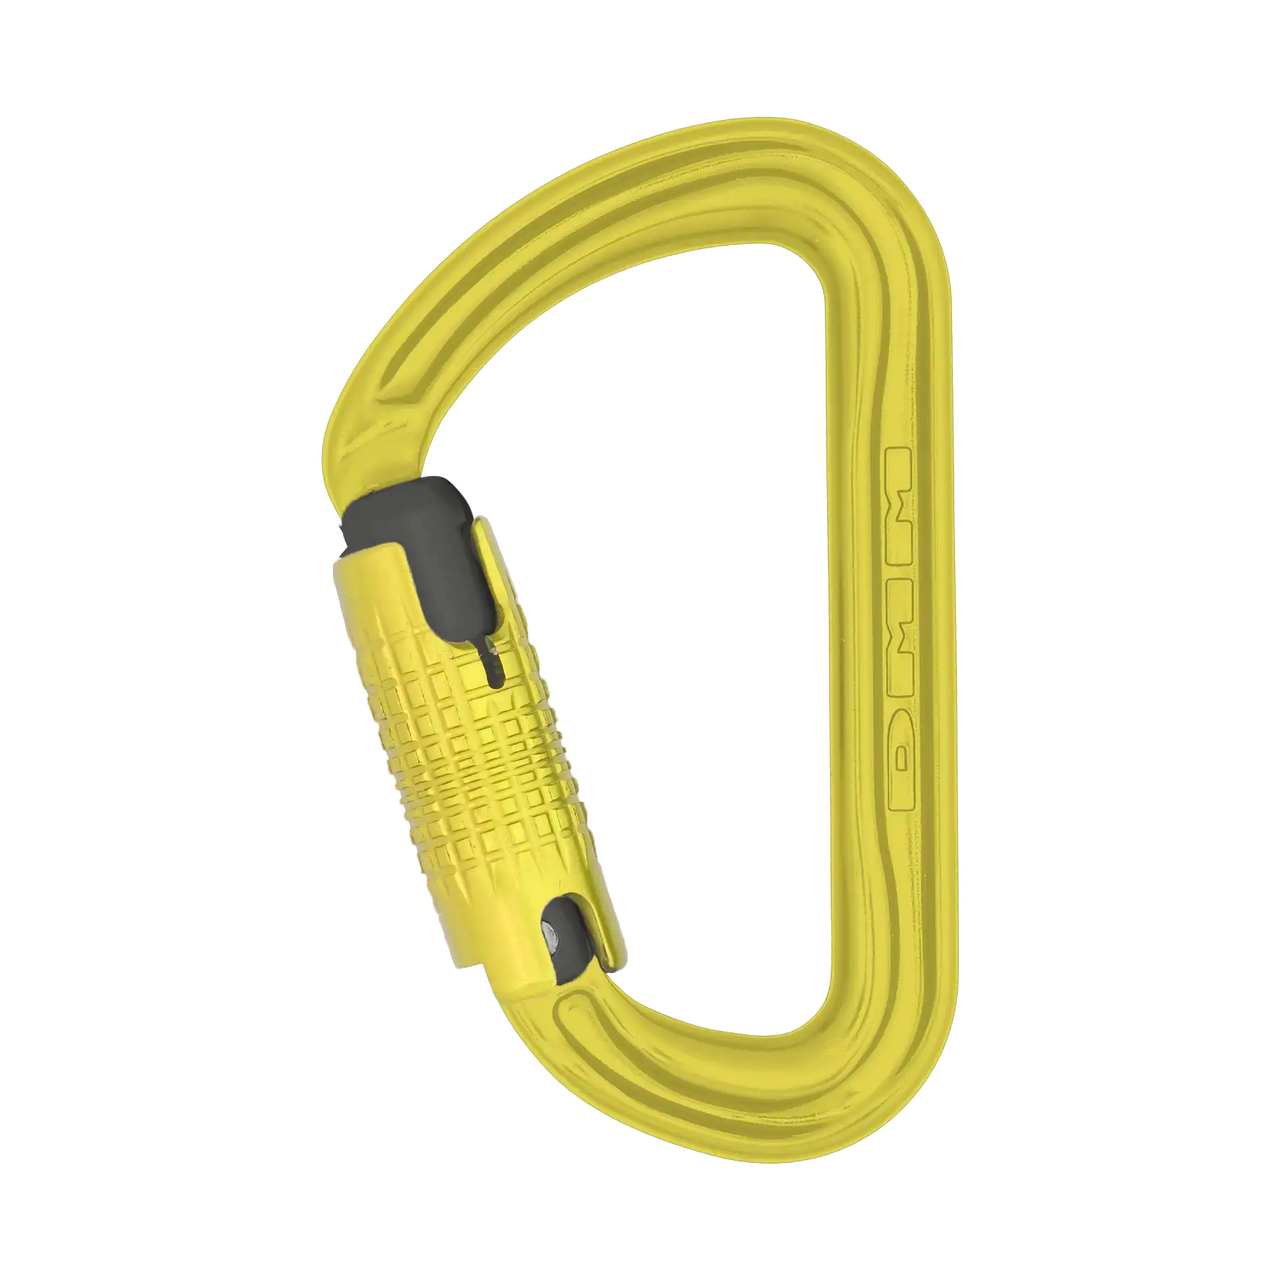 DMM Shadow Locksafe (3-Stage) Forged Aluminum Carabiner